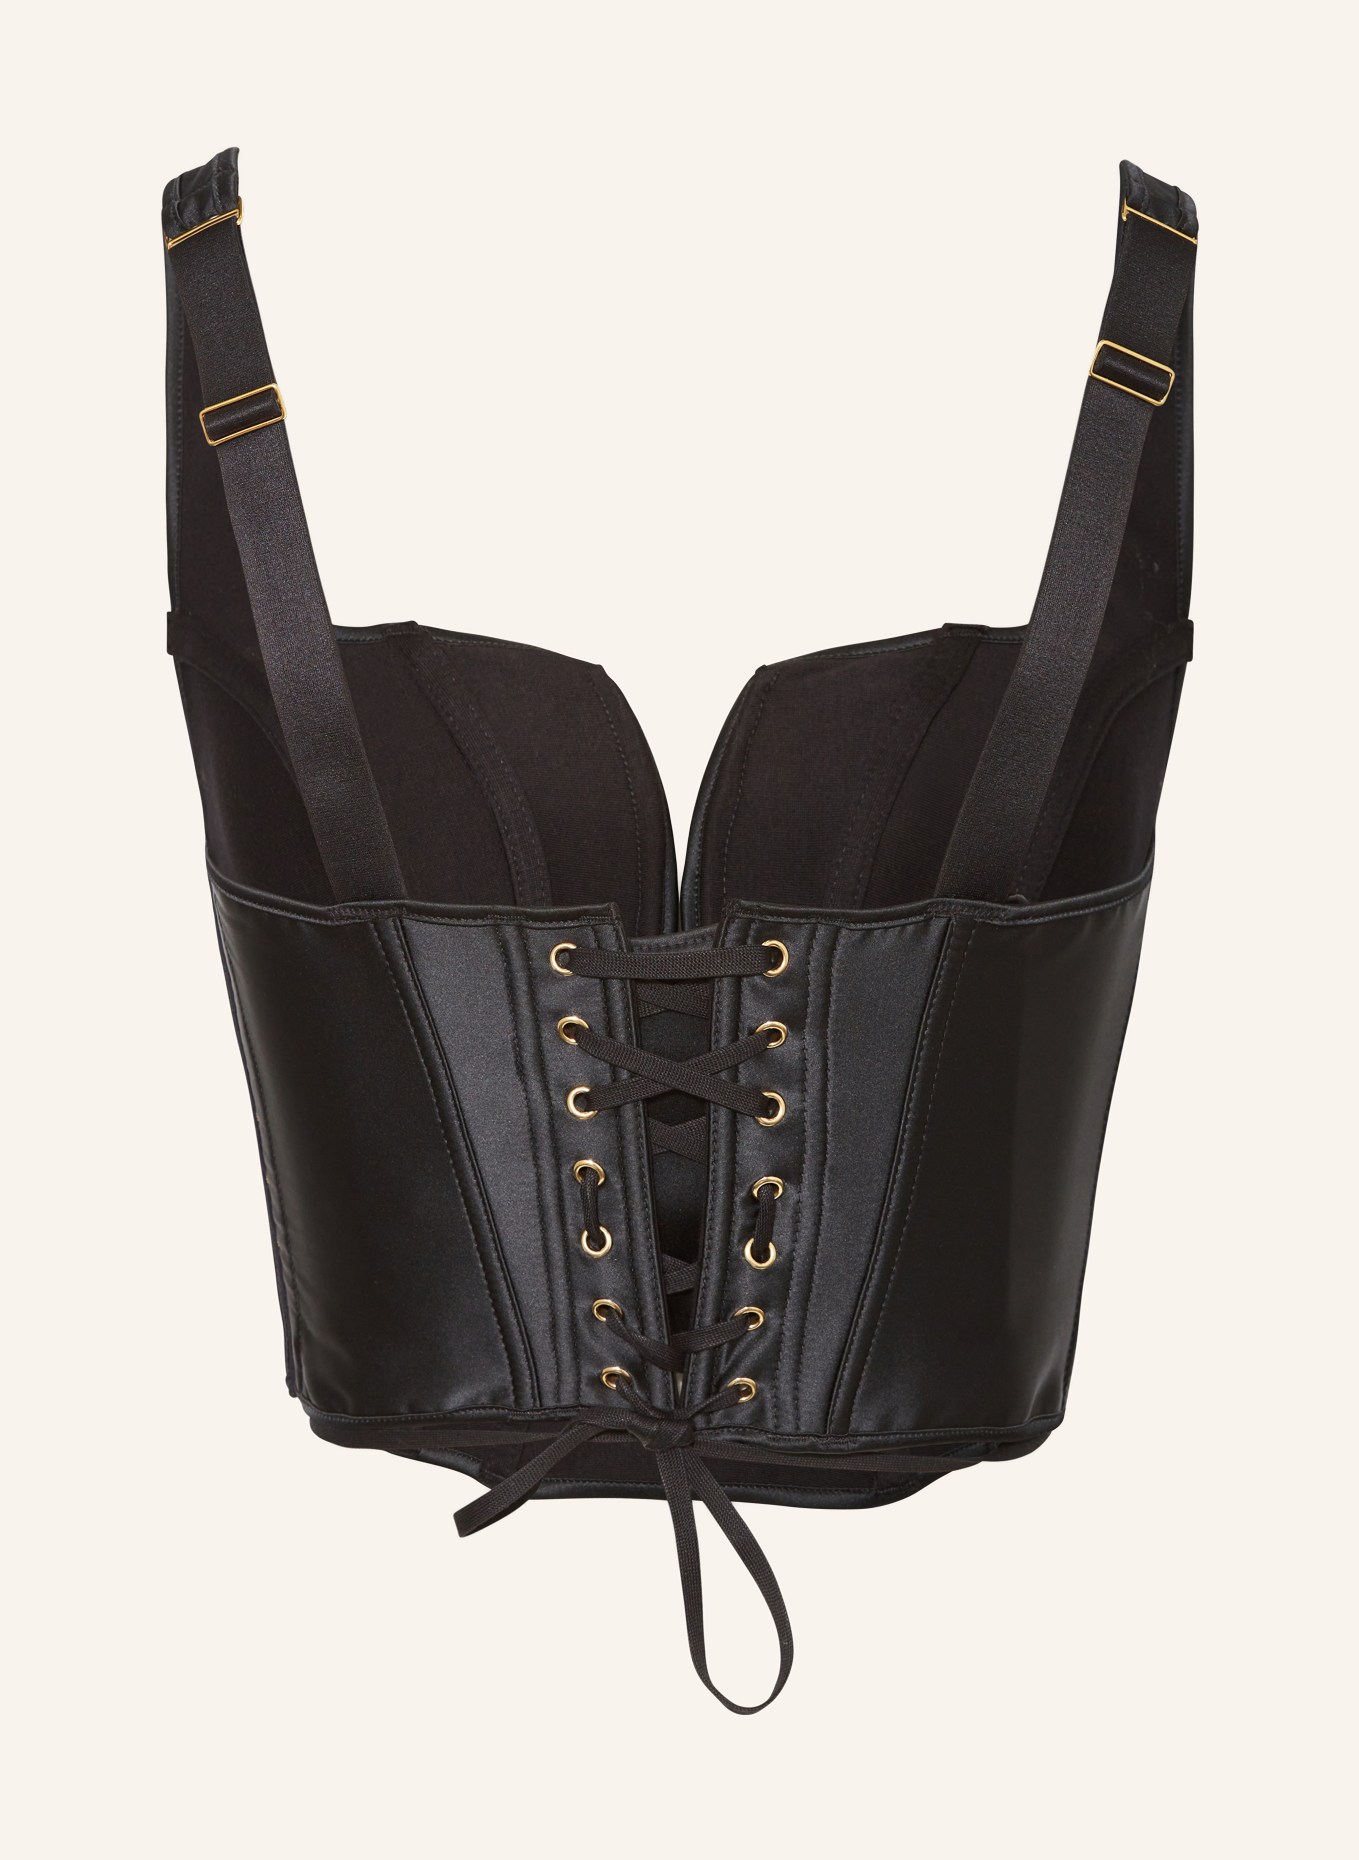 Aubade Corset ICONIC ALLURE made of satin in black